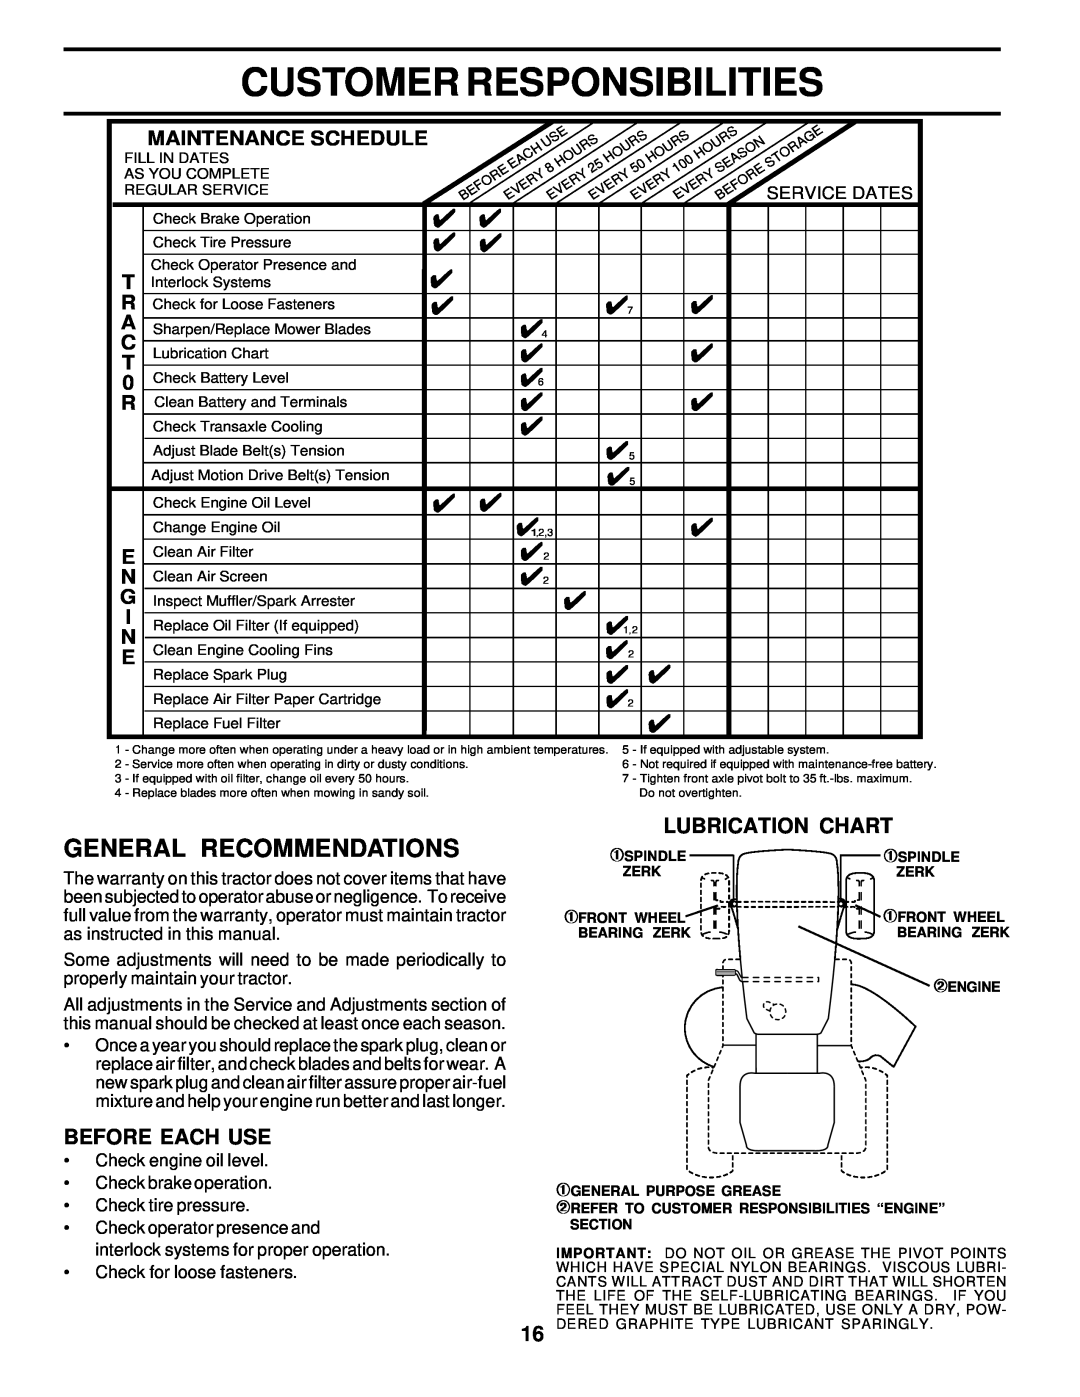 Weed Eater 178277 owner manual Customer Responsibilities, General Recommendations, Before Each Use, Maintenance Schedule 